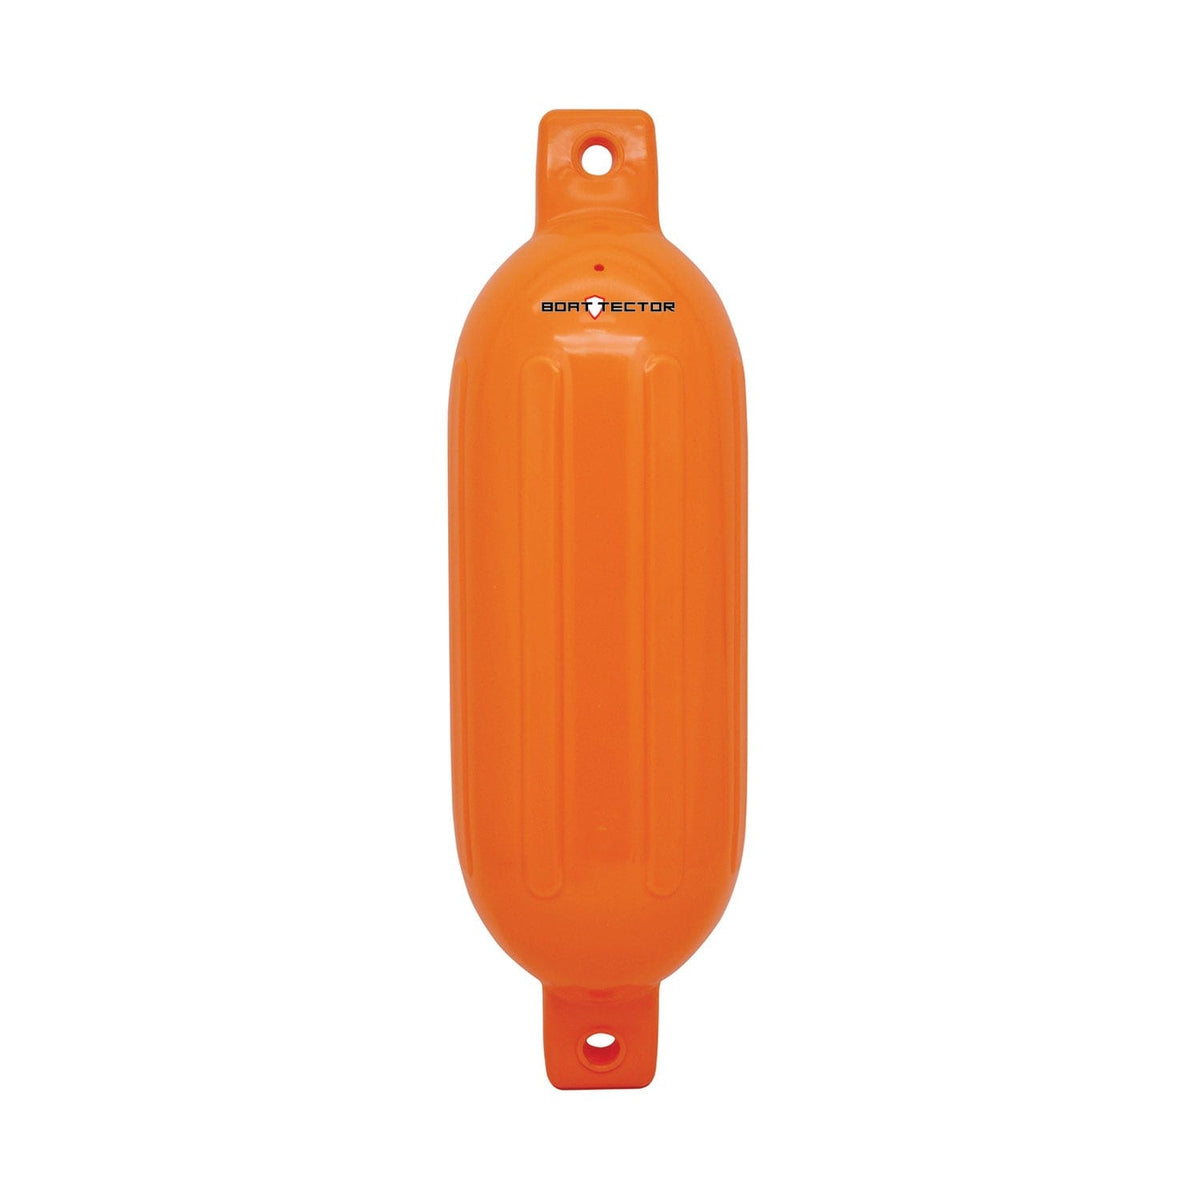 Extreme Max Qualifies for Free Shipping Extreme Max BoatTector Fender 4.5" x 16" Neon Orange #3006.7656